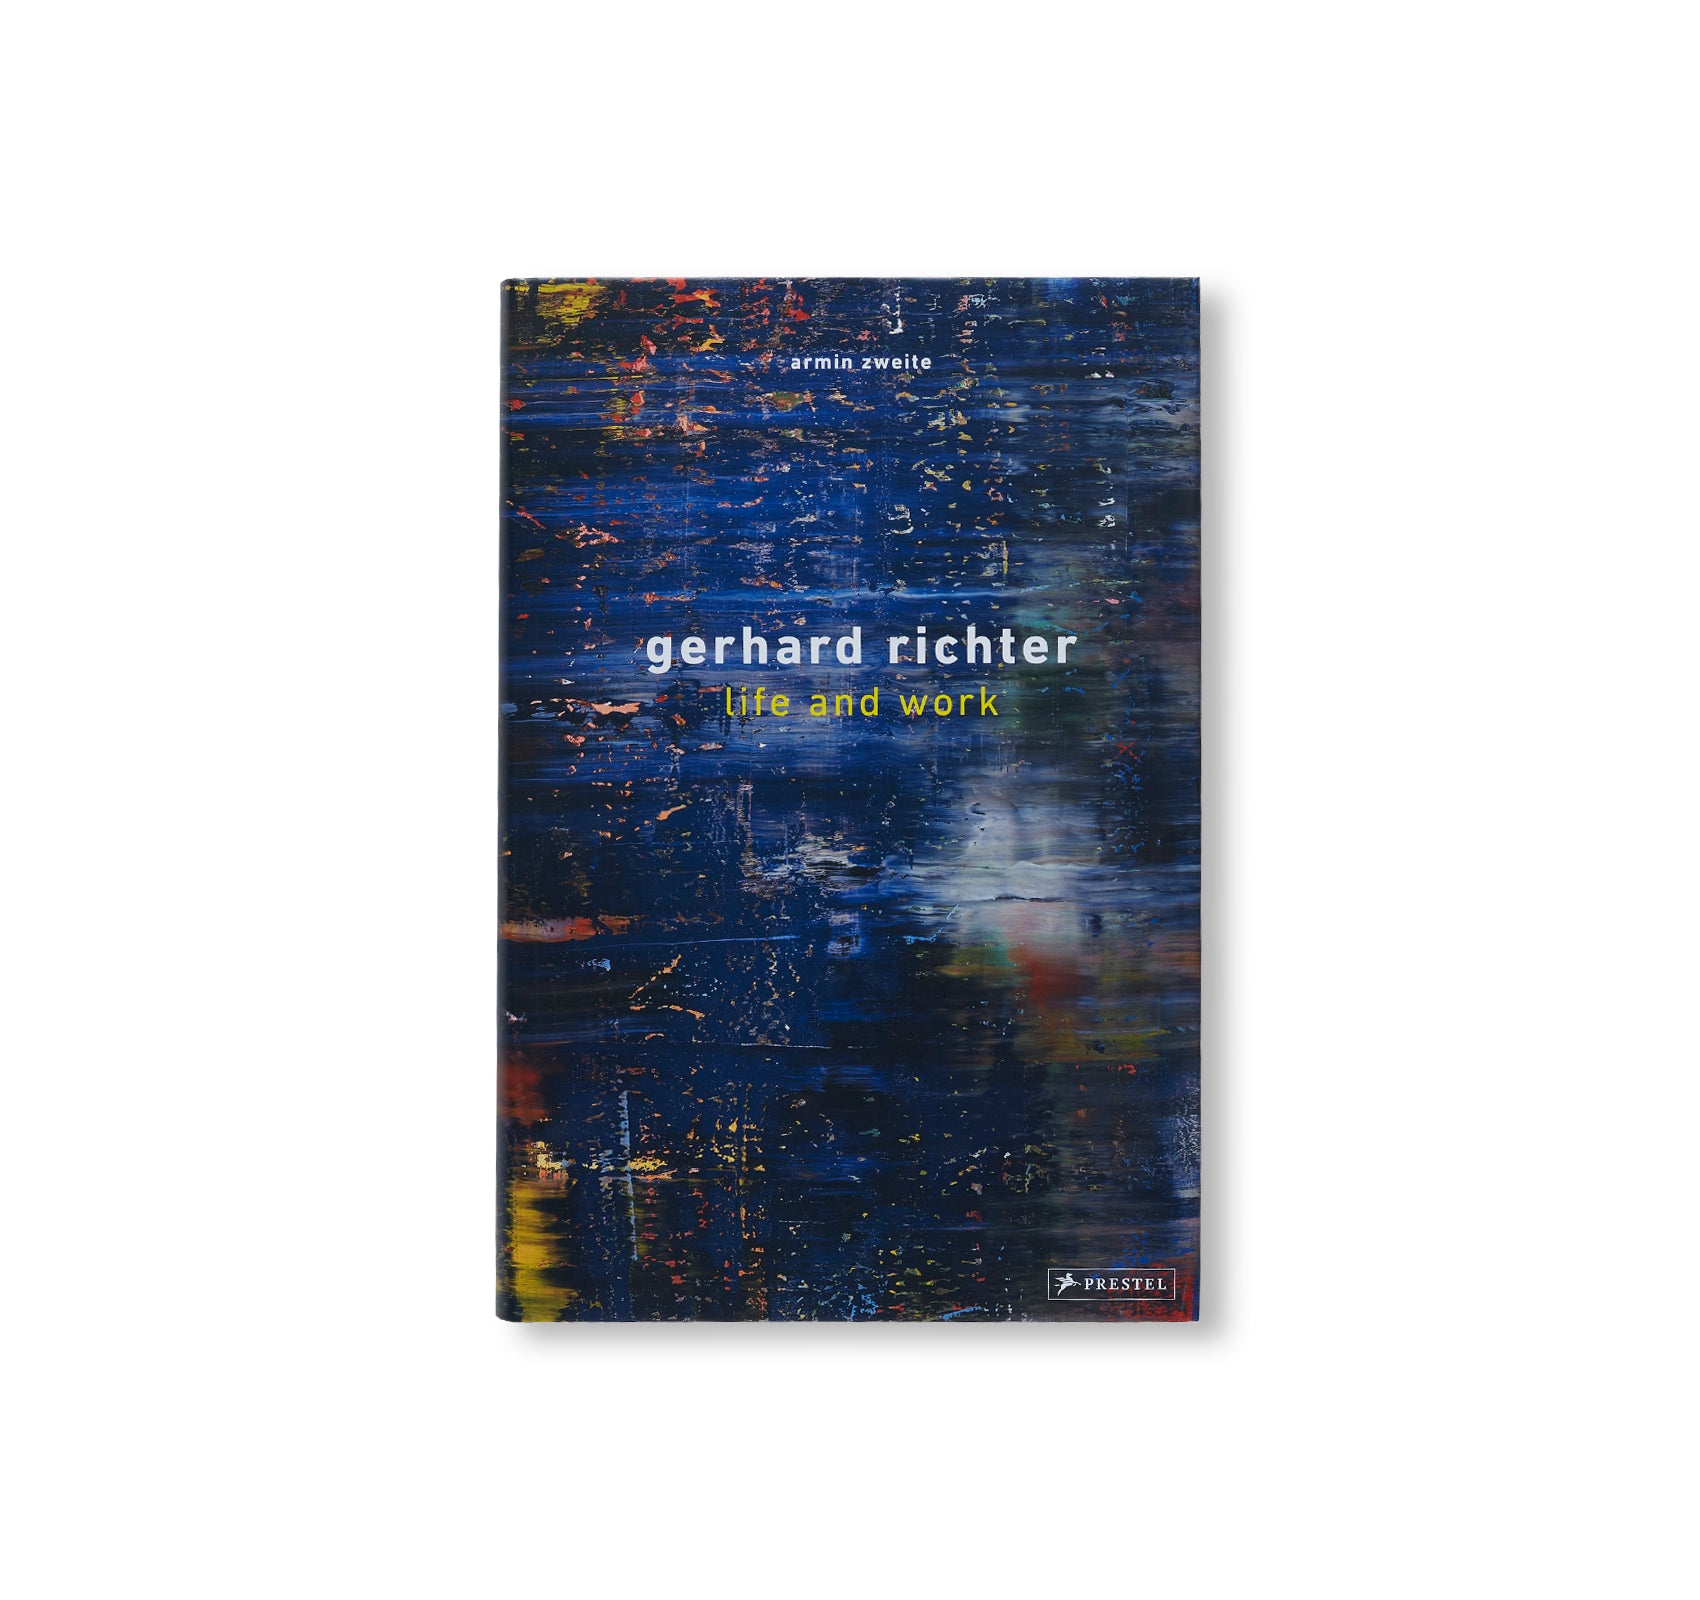 PAINTING　IS　WORK:　RICHTER　THINKING　PAINTING　by　twelvebooks　Ger　–　GERHARD　AND　LIFE　IN